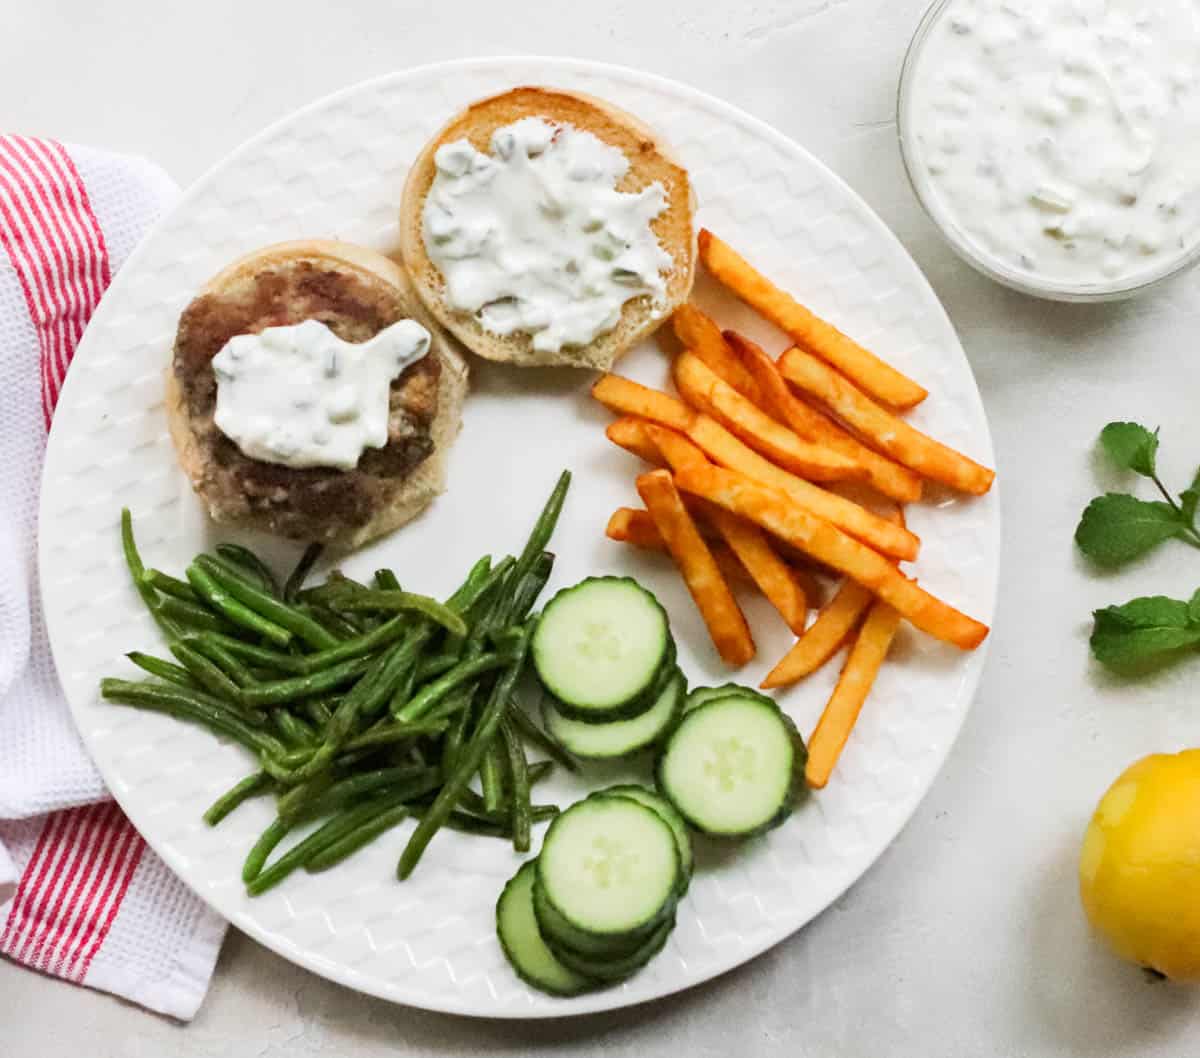 fresh mint and lemon next to a white plate with lamb burger, sliced cucumbers, tzatziki sauce, roasted green beans, and fries.